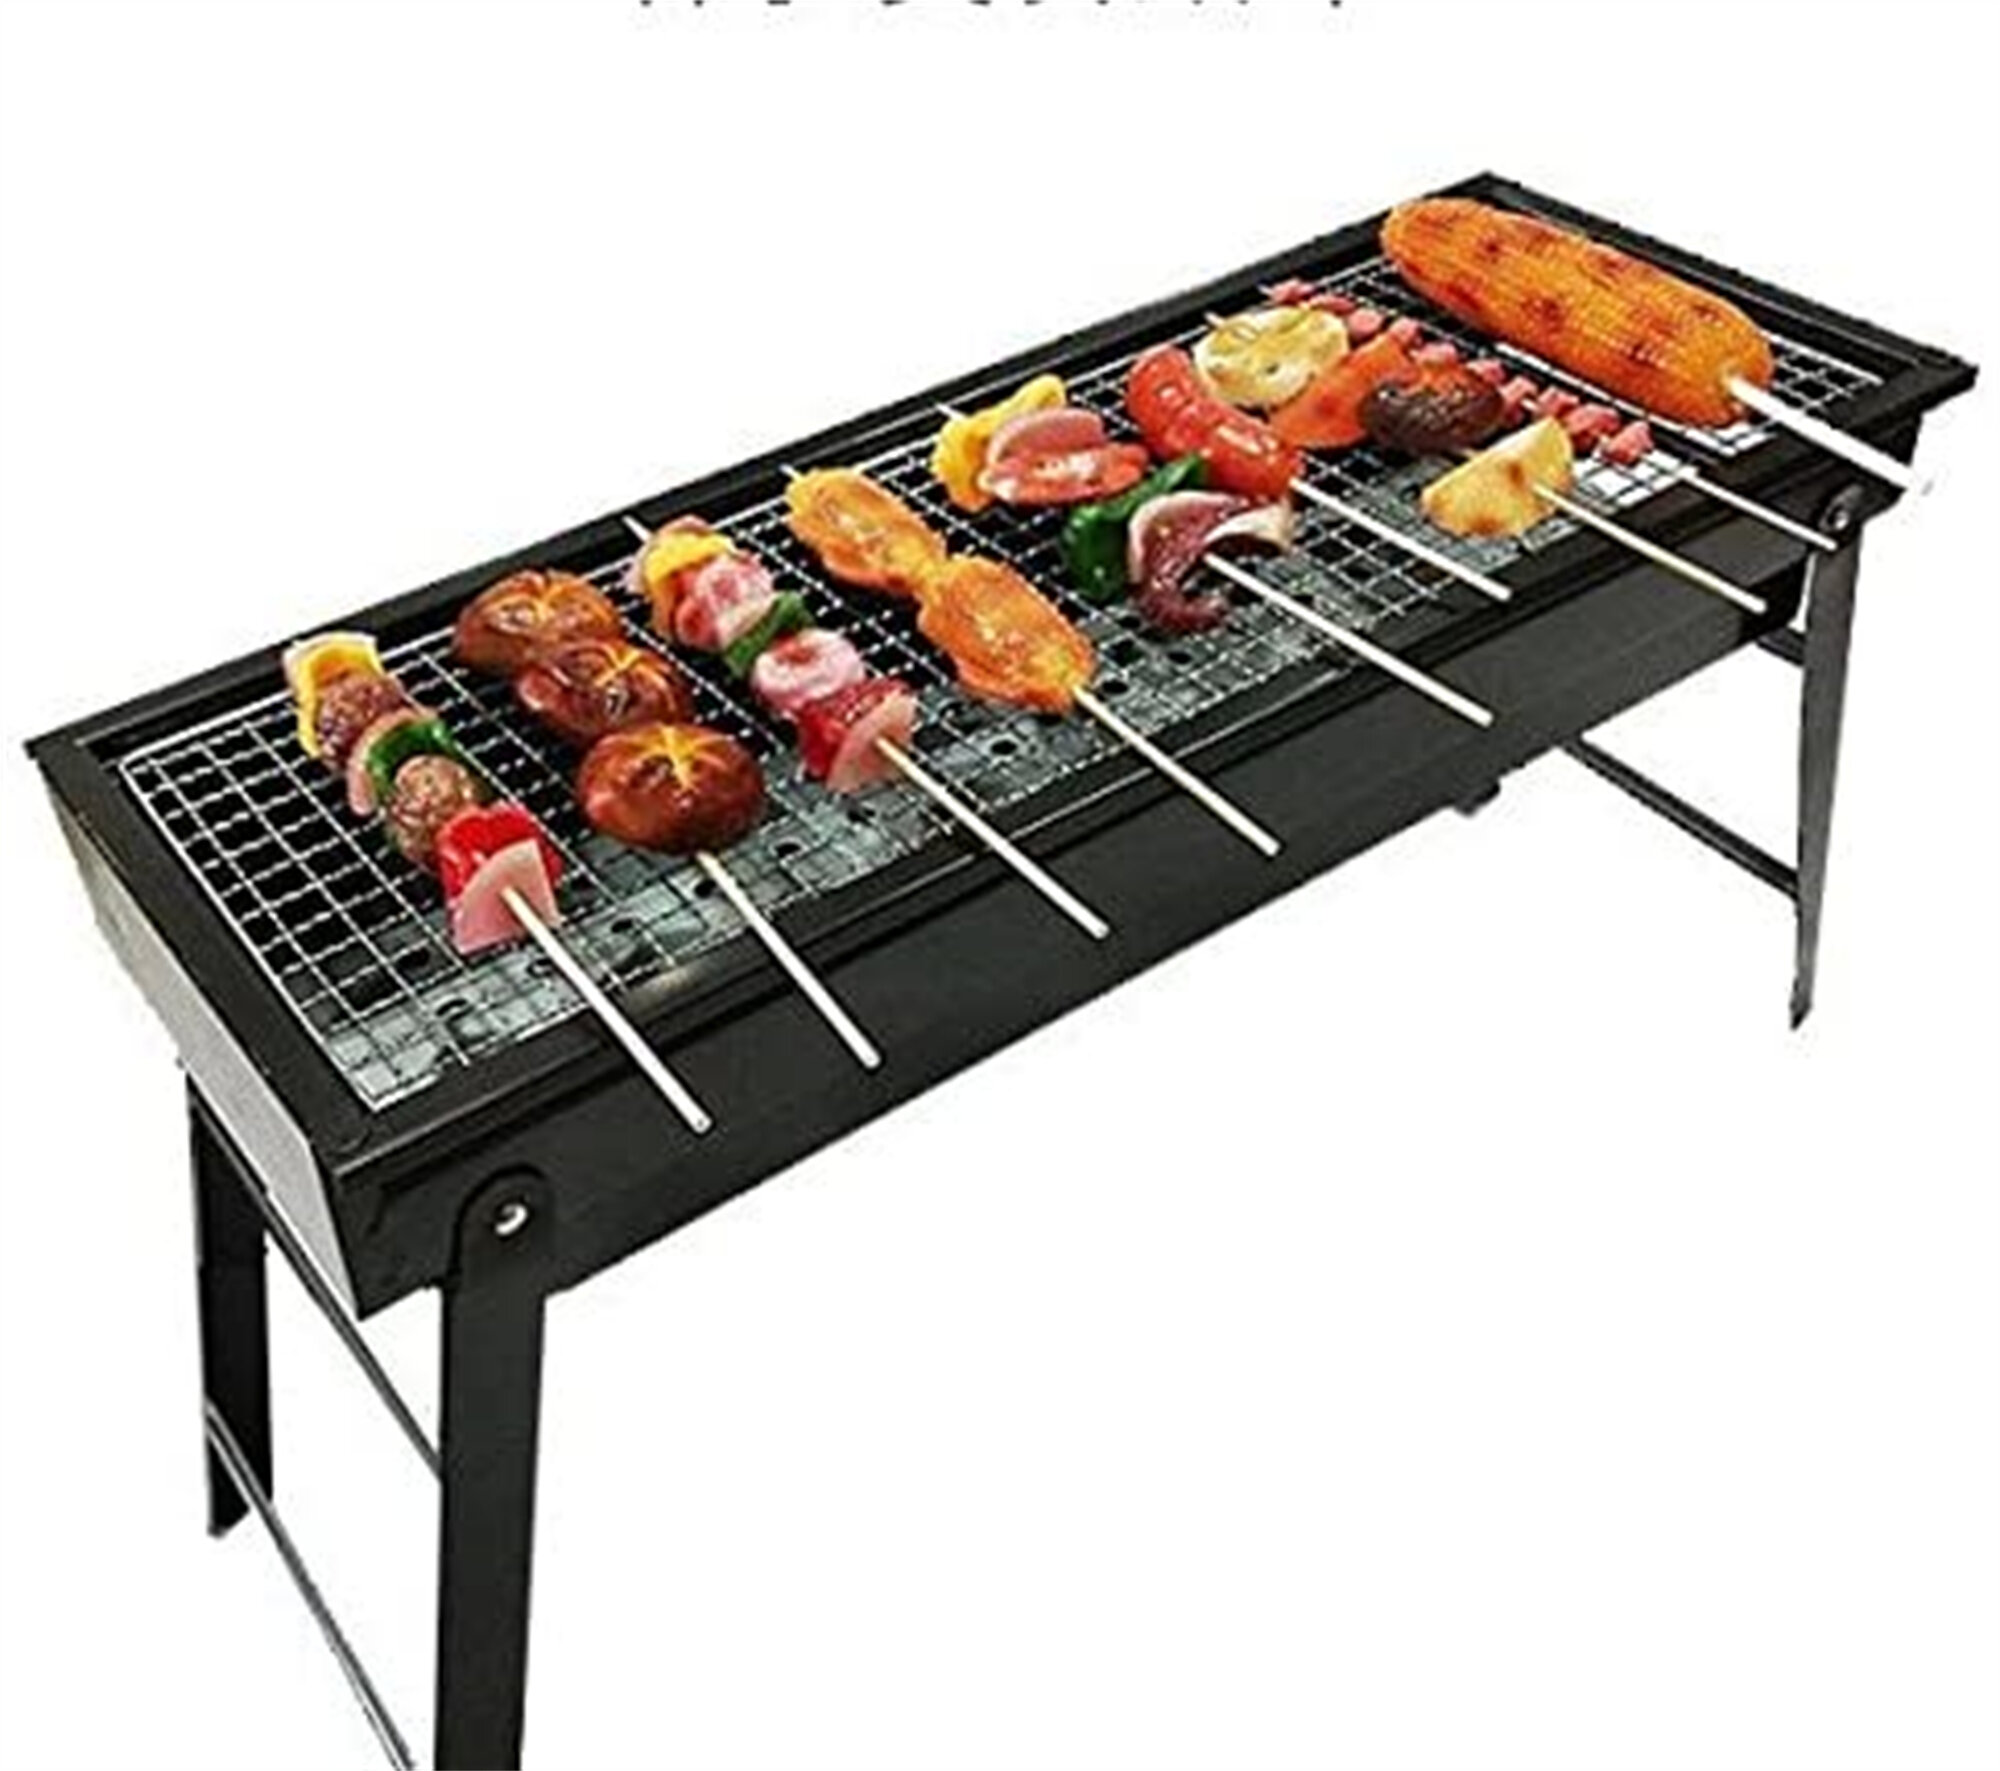 Outdoor Portable Mini Camping Picnic Foldable Barbecue Grill BBQ Cook Rack Tool 